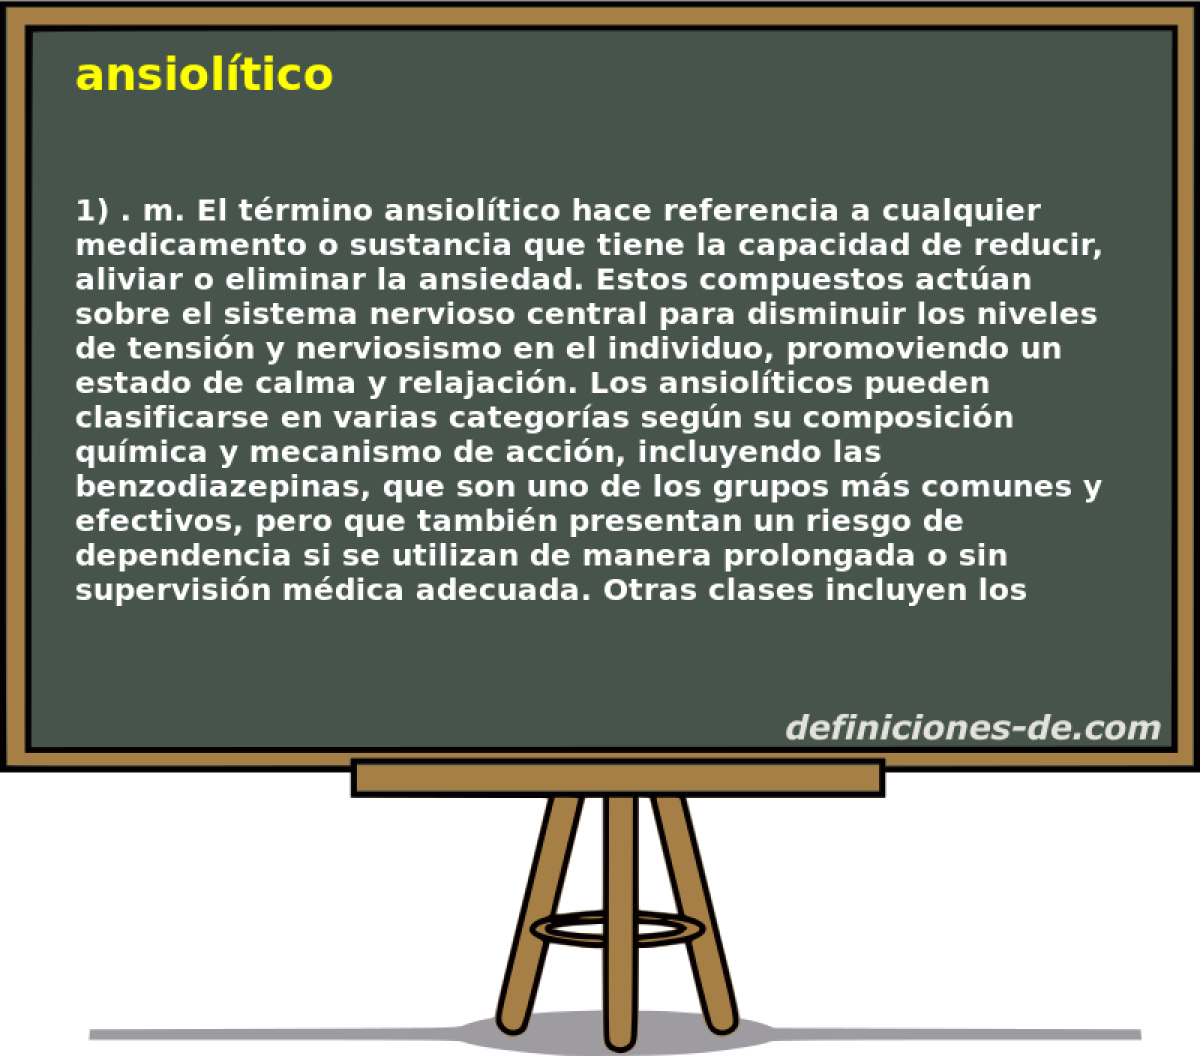 ansioltico 